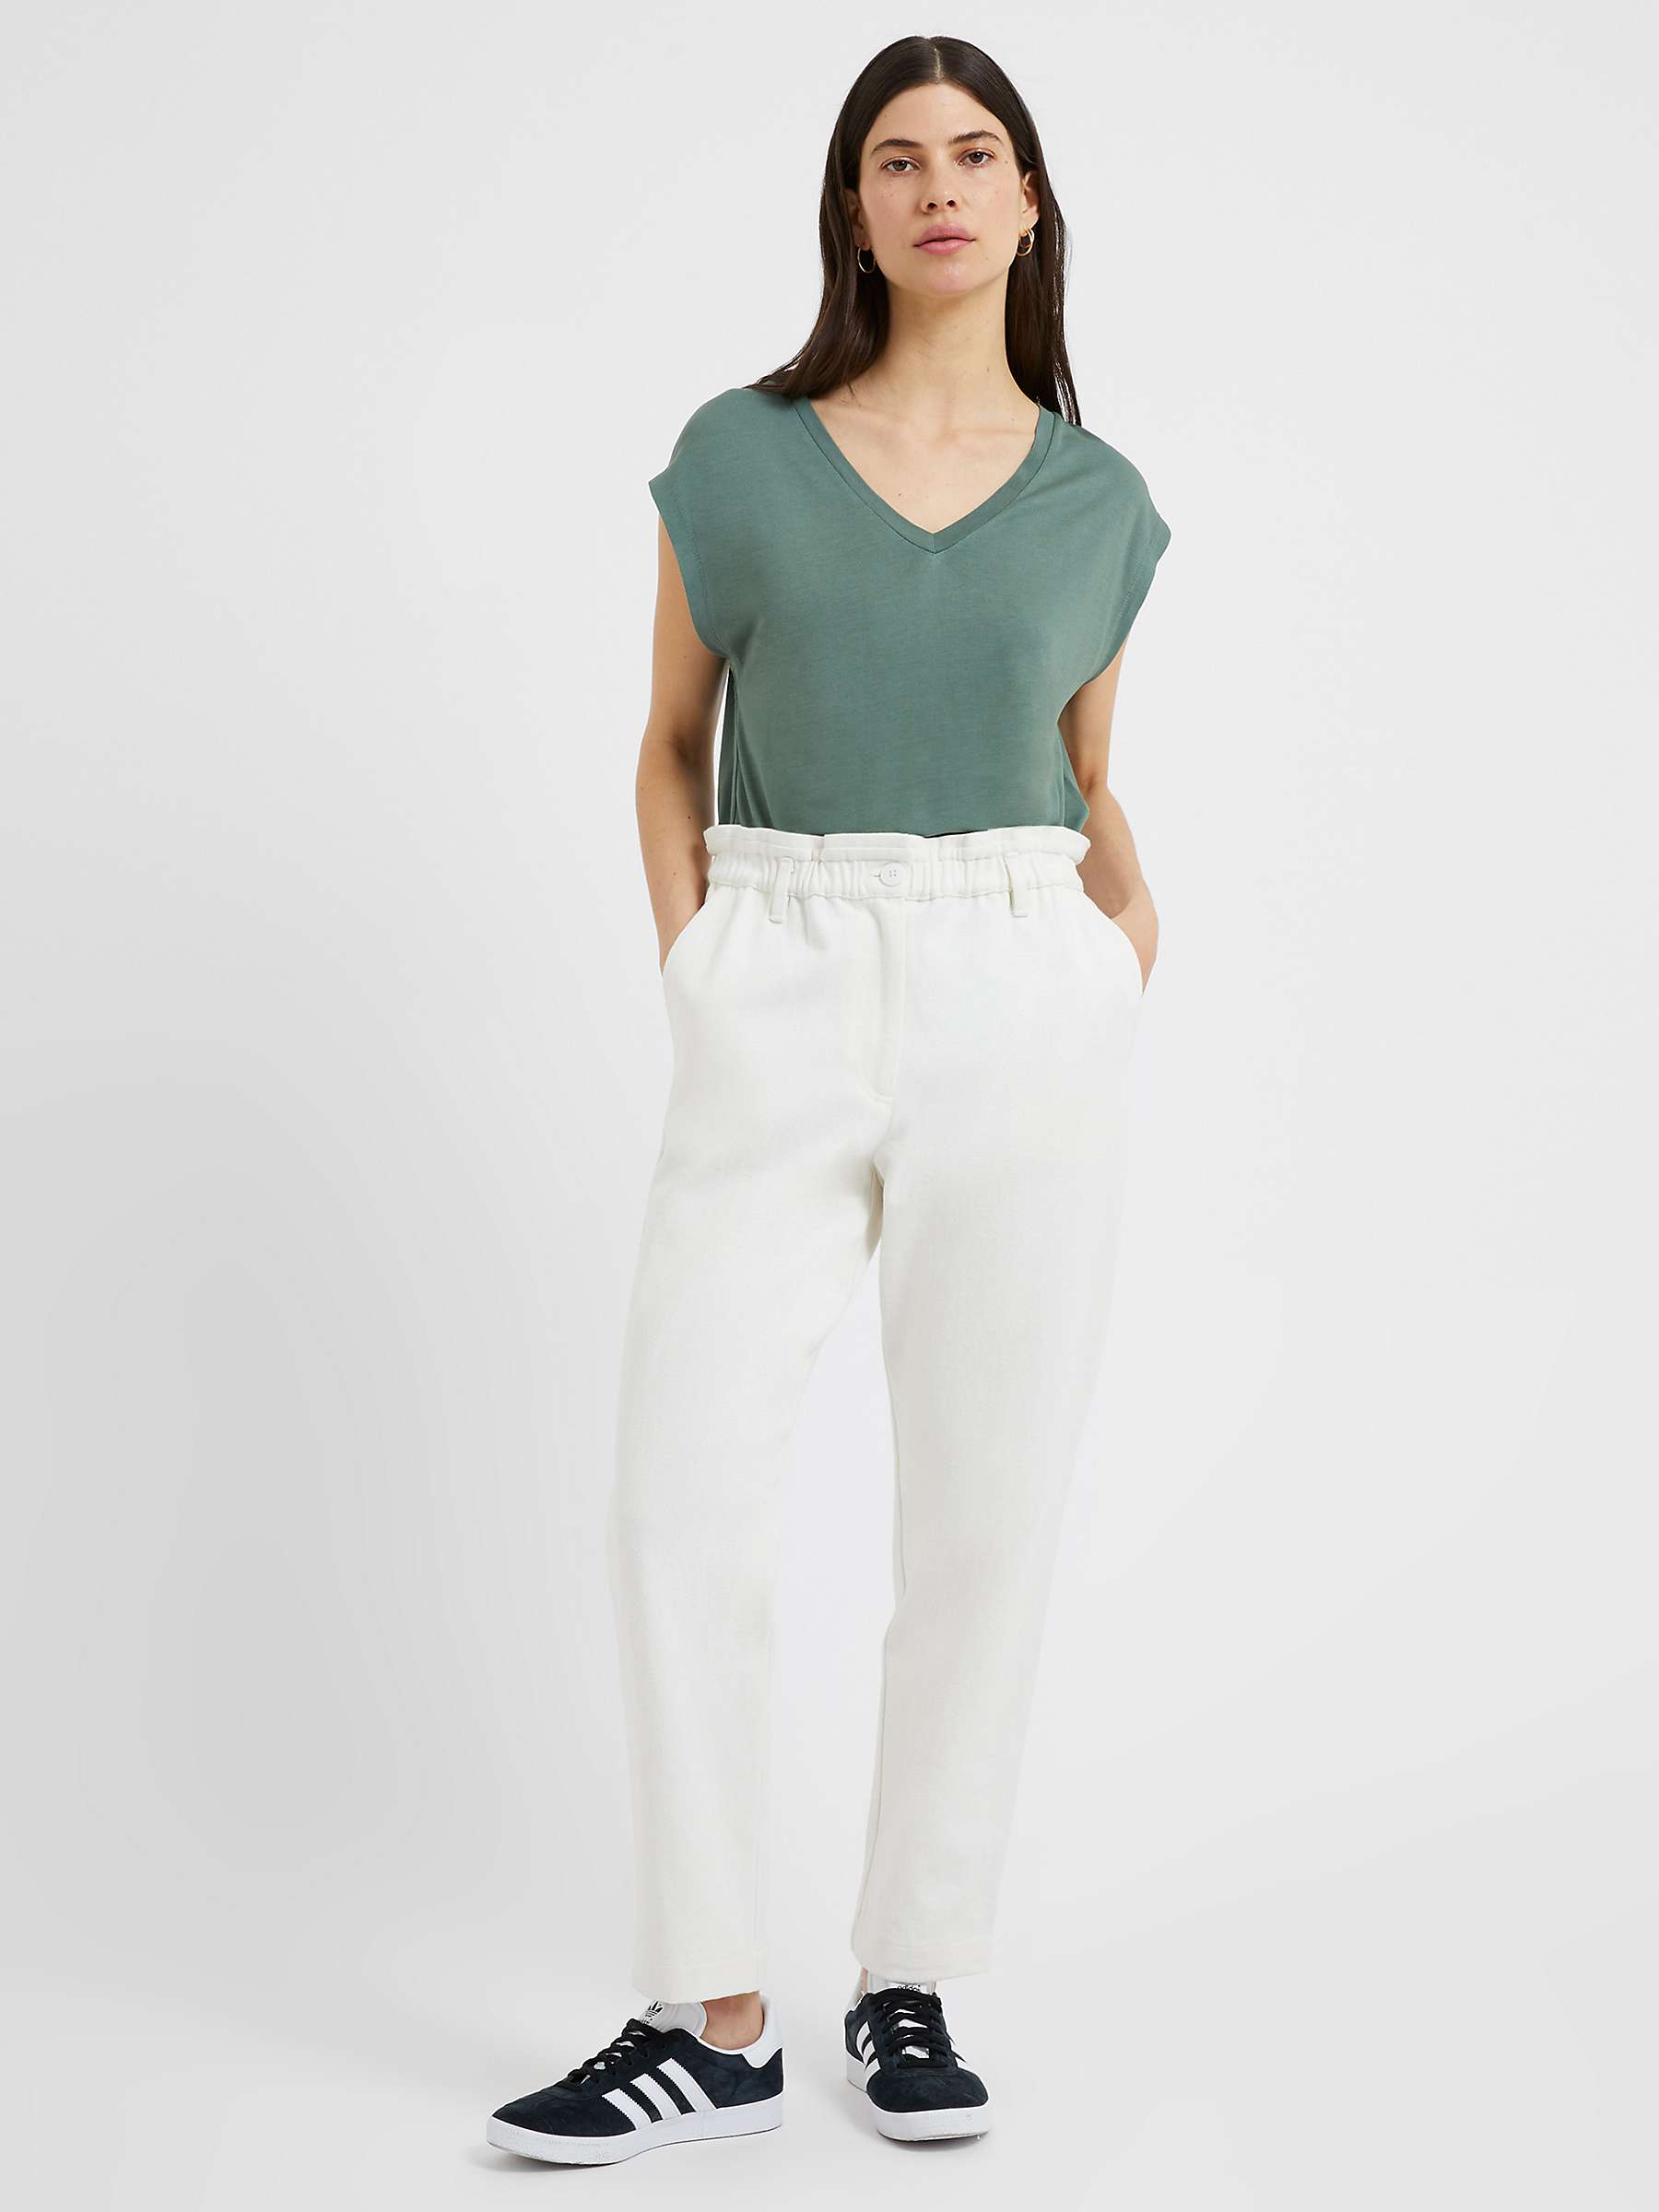 Buy Great Plains Soft Touch Jersey V-Neck Top Online at johnlewis.com